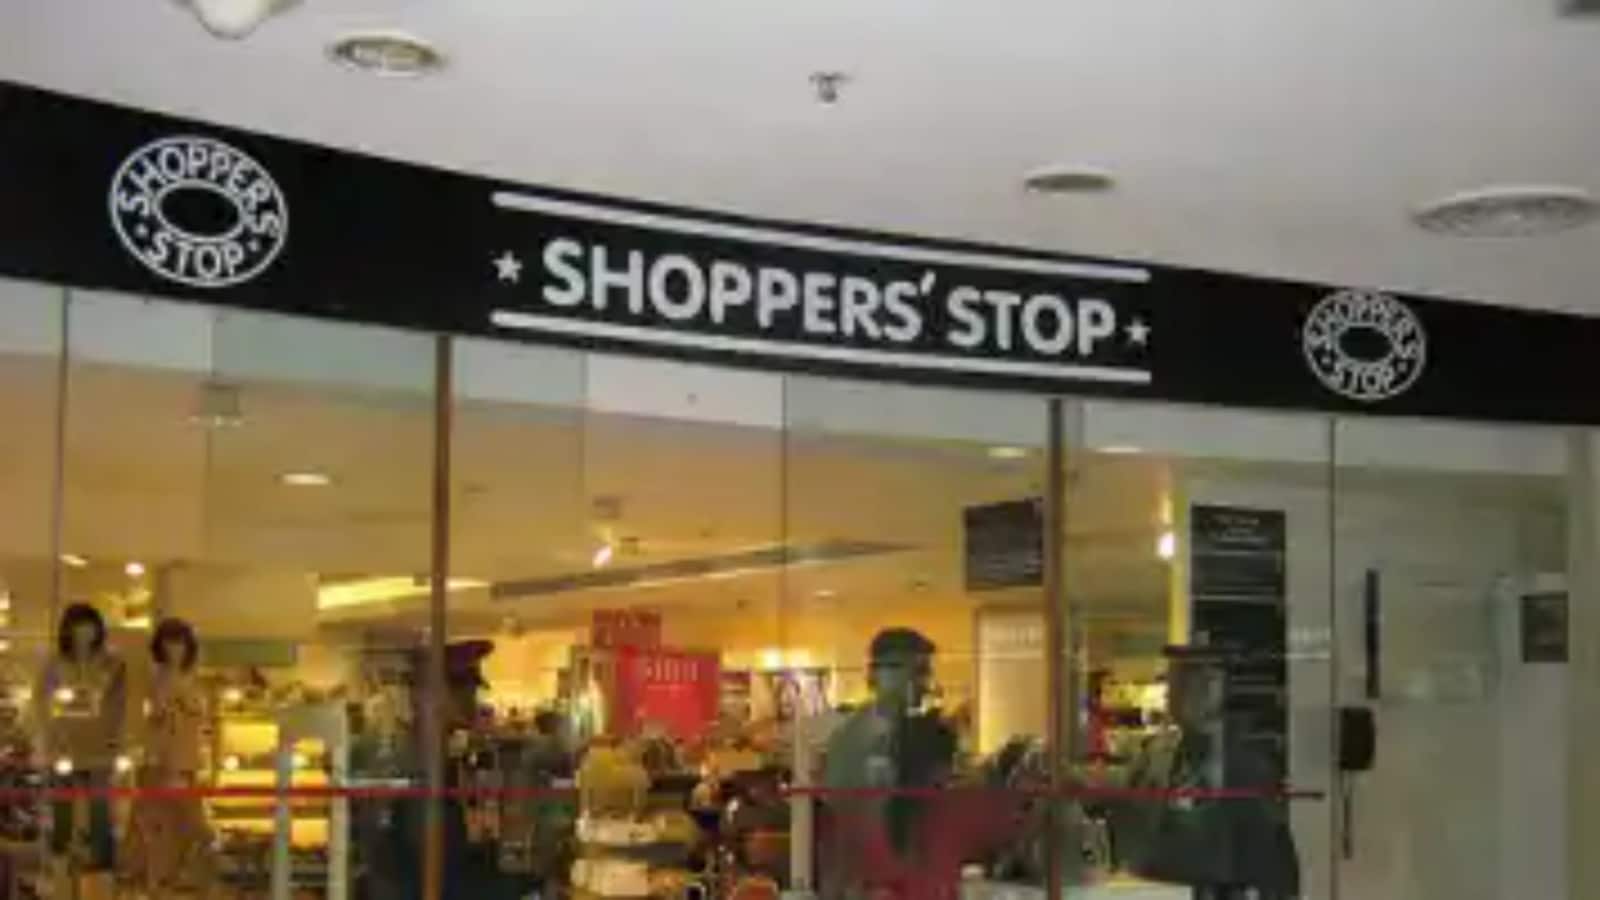 Up to 80% of our sales originate online, says Shoppers Stop MD Venu Nair